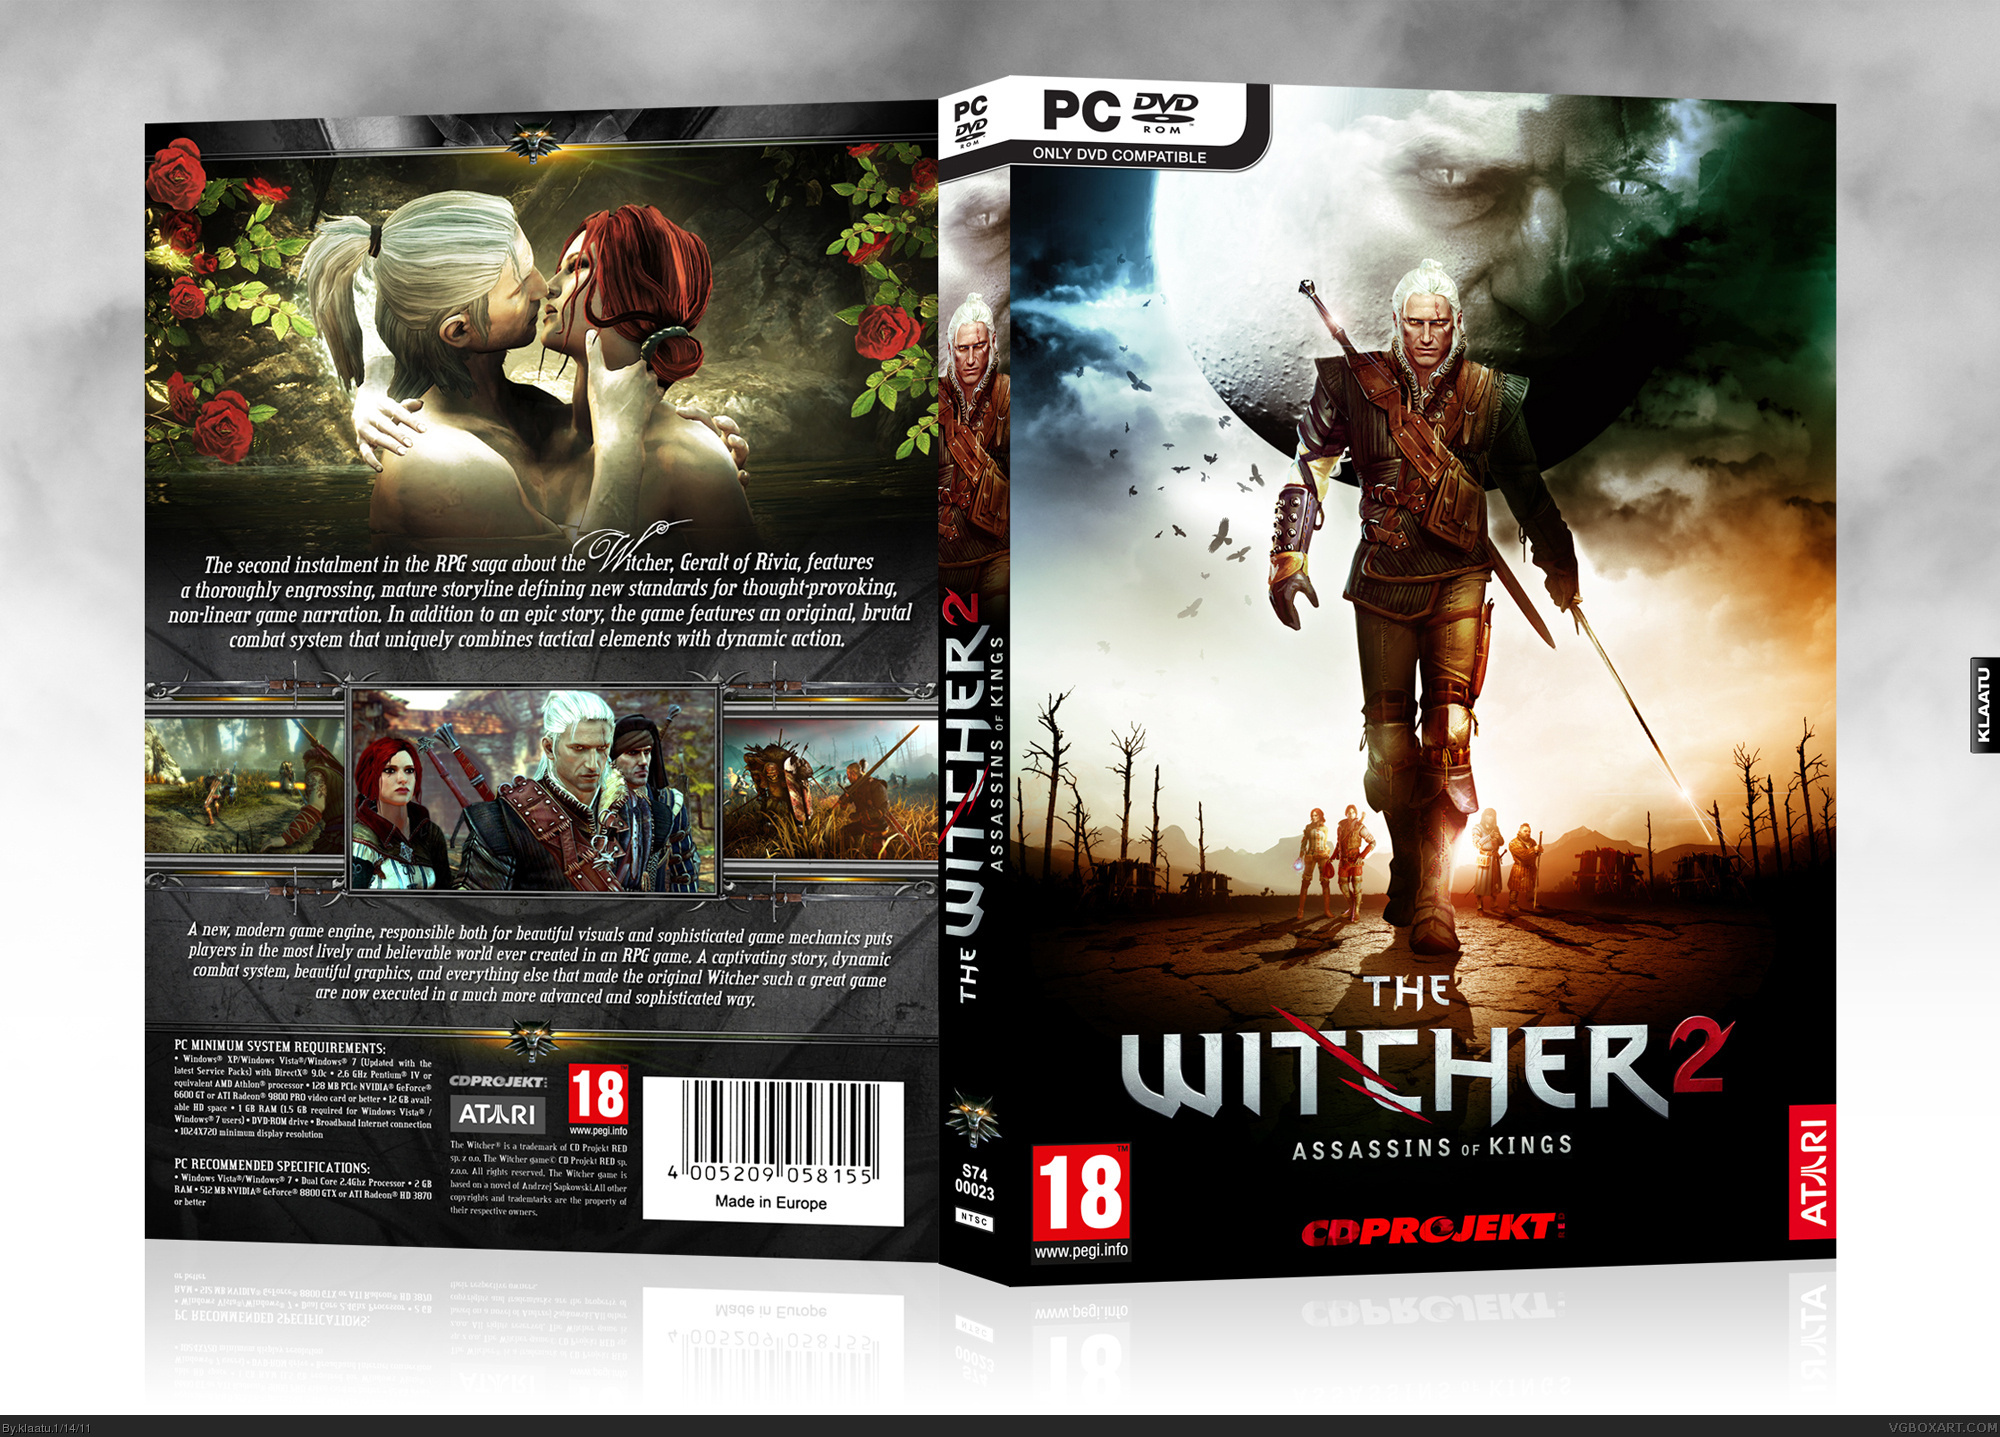 Viewing full size The Witcher 2: Assassins of Kings box cover